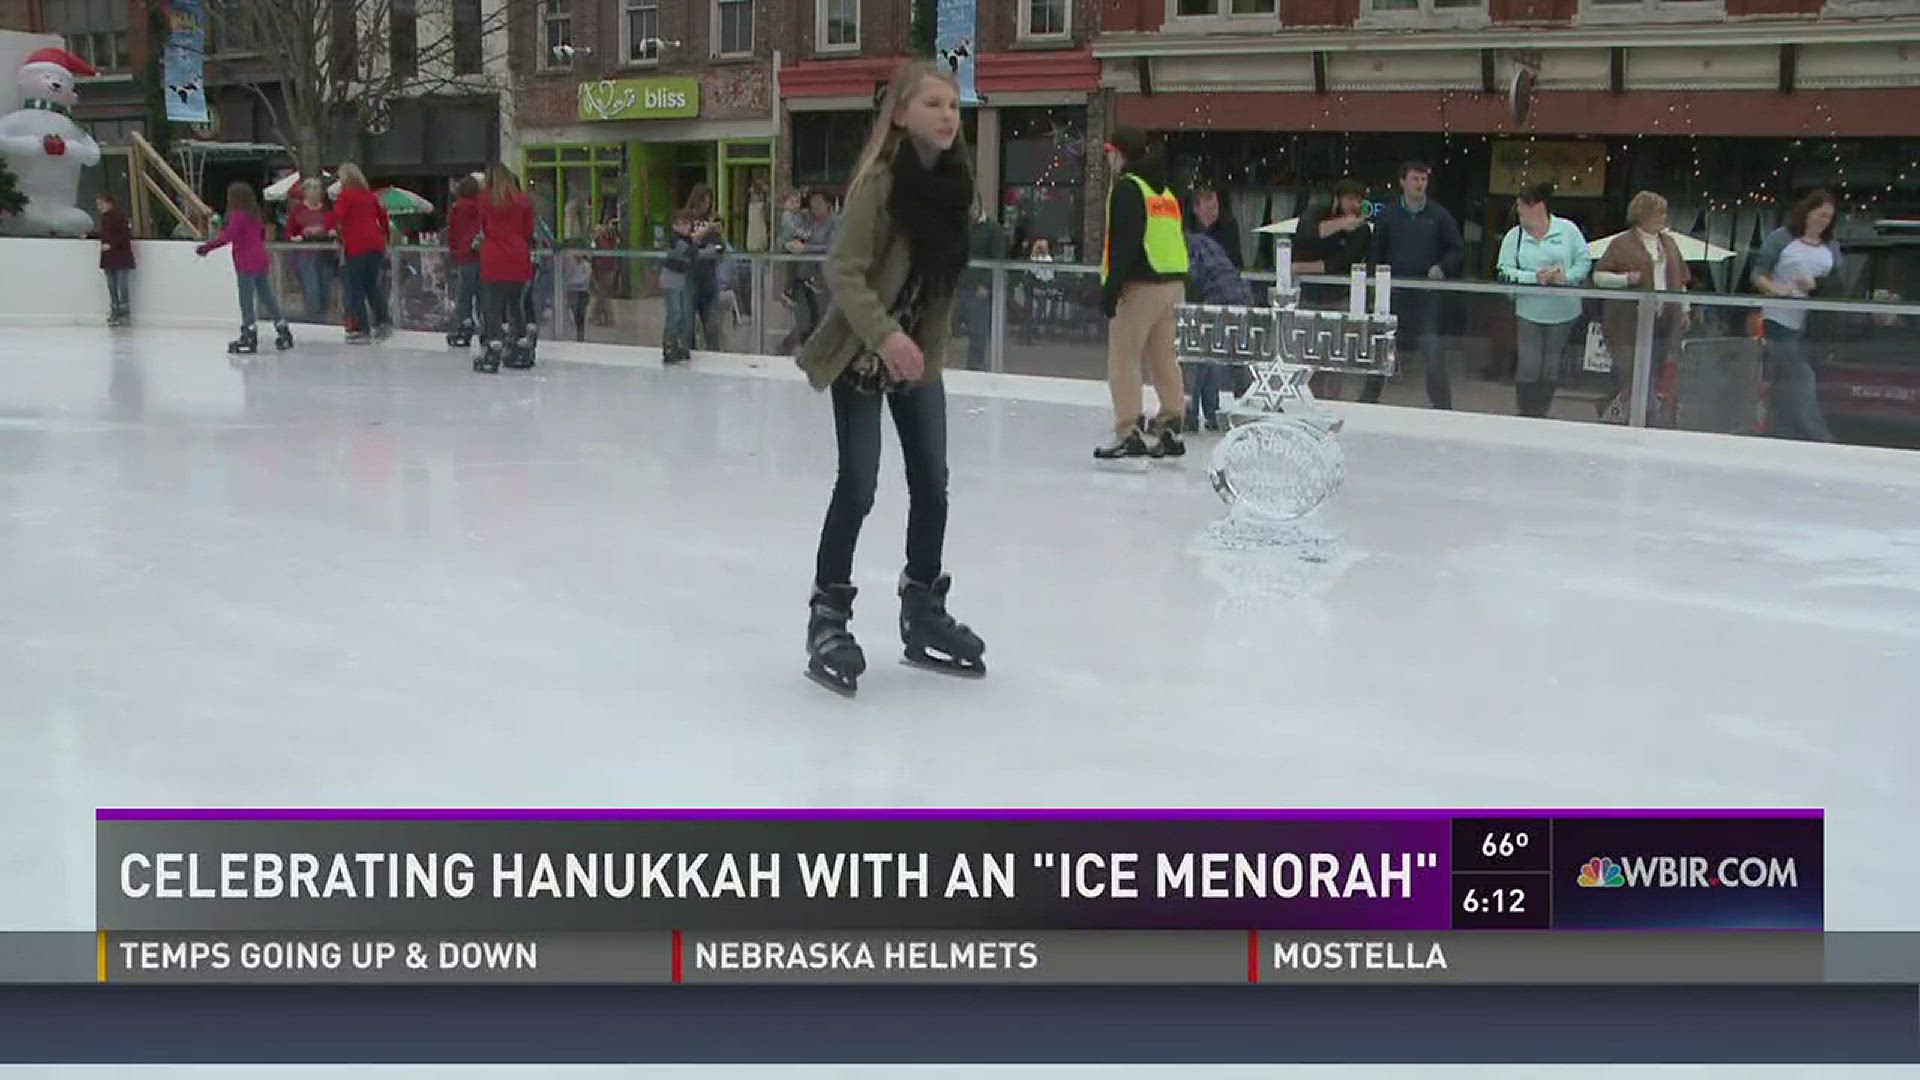 Dec. 26, 2016: Local Jewish leaders brought a menorah carved out of ice to the Market Square ice skating rink for a Hanukkah celebration.